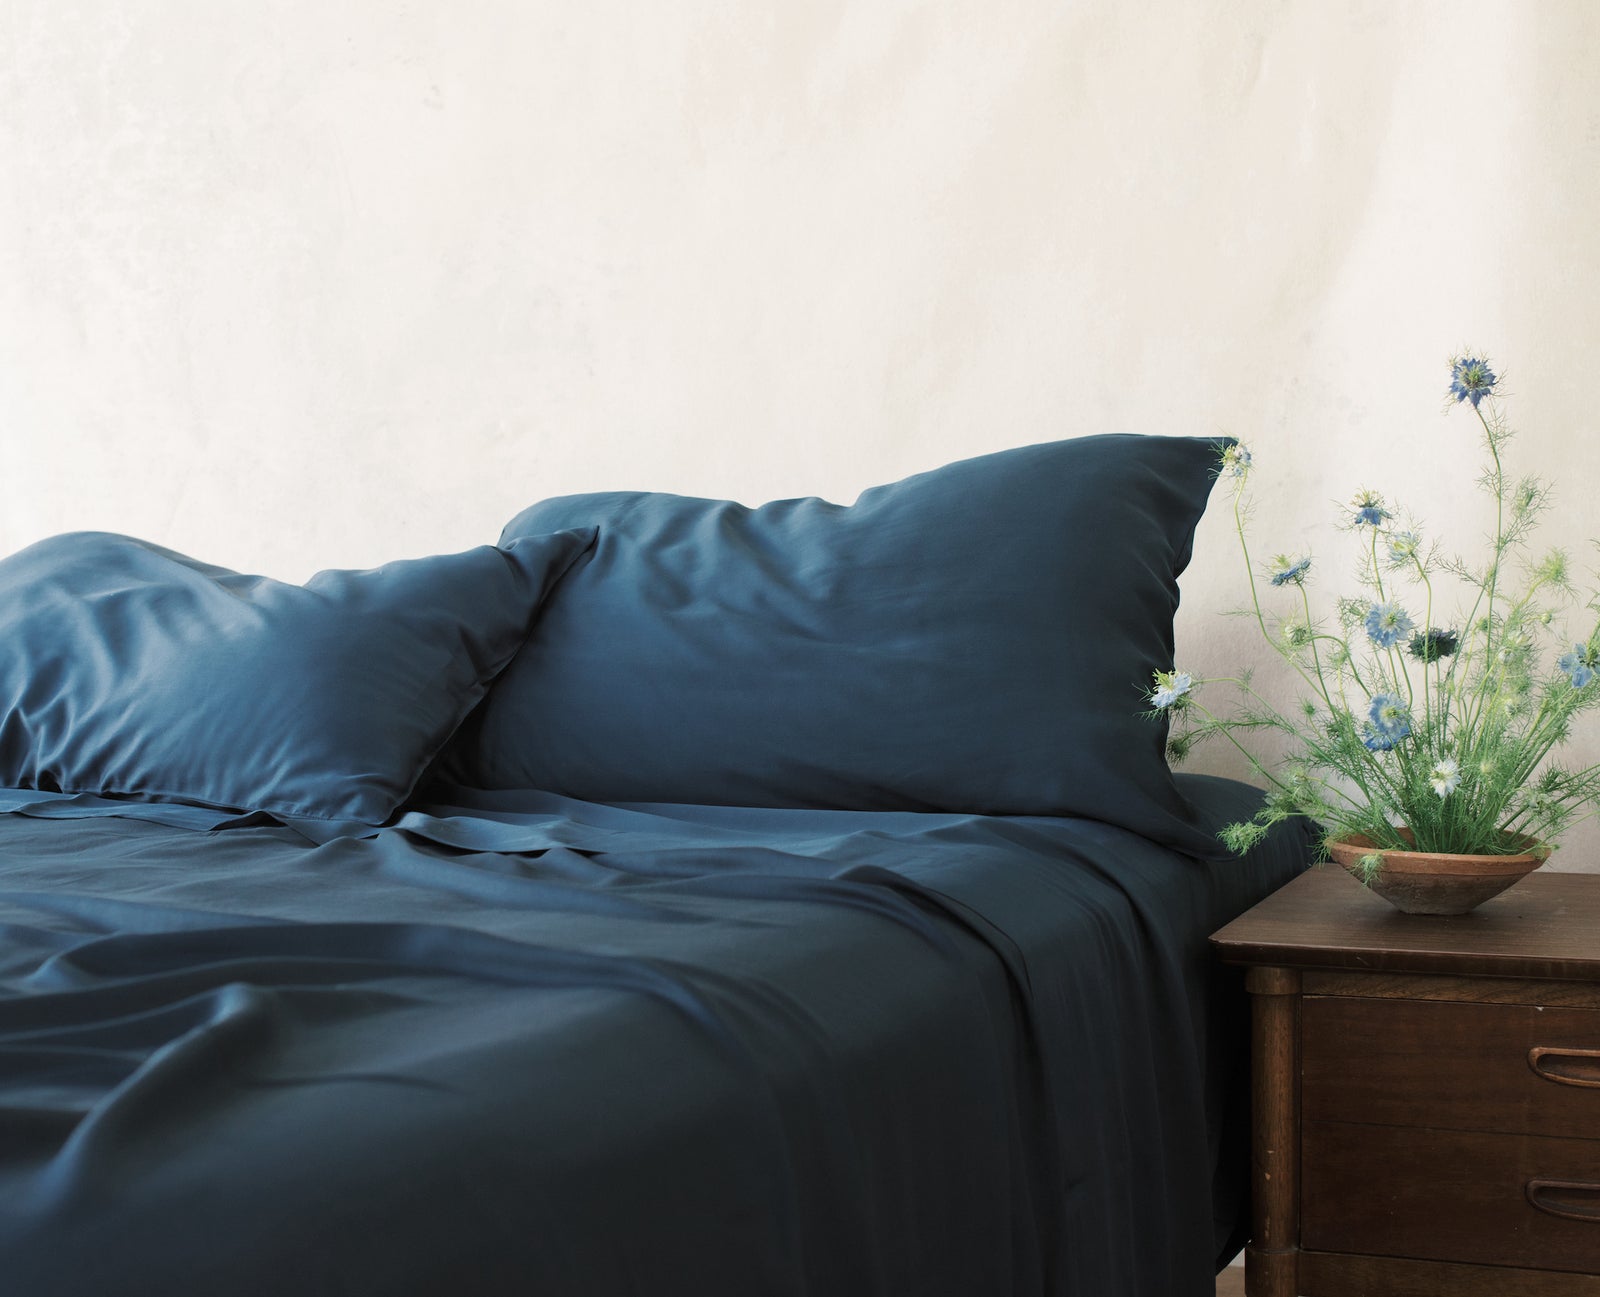 Unmade bed with navy bedding and flowers on nightstand 